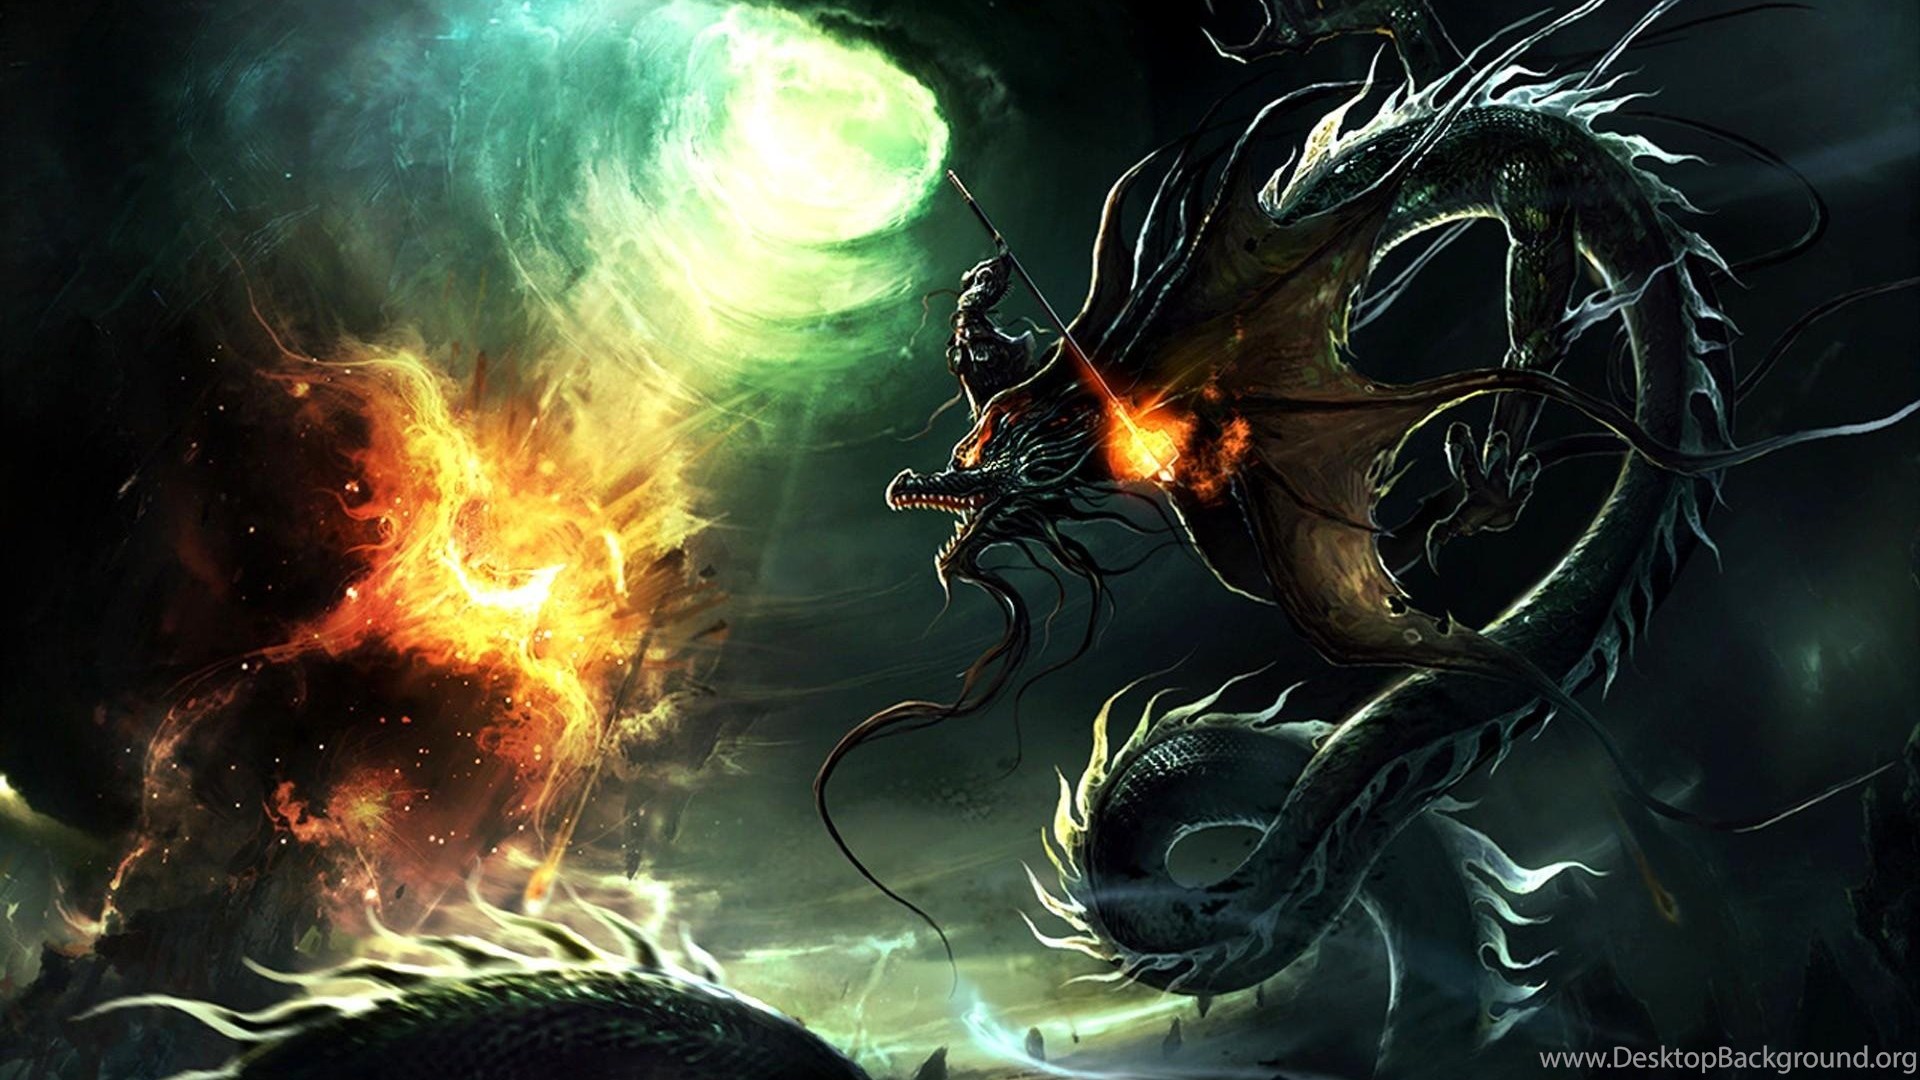 Dragon And Tiger HD Wallpaper For iPhone Desktop Background